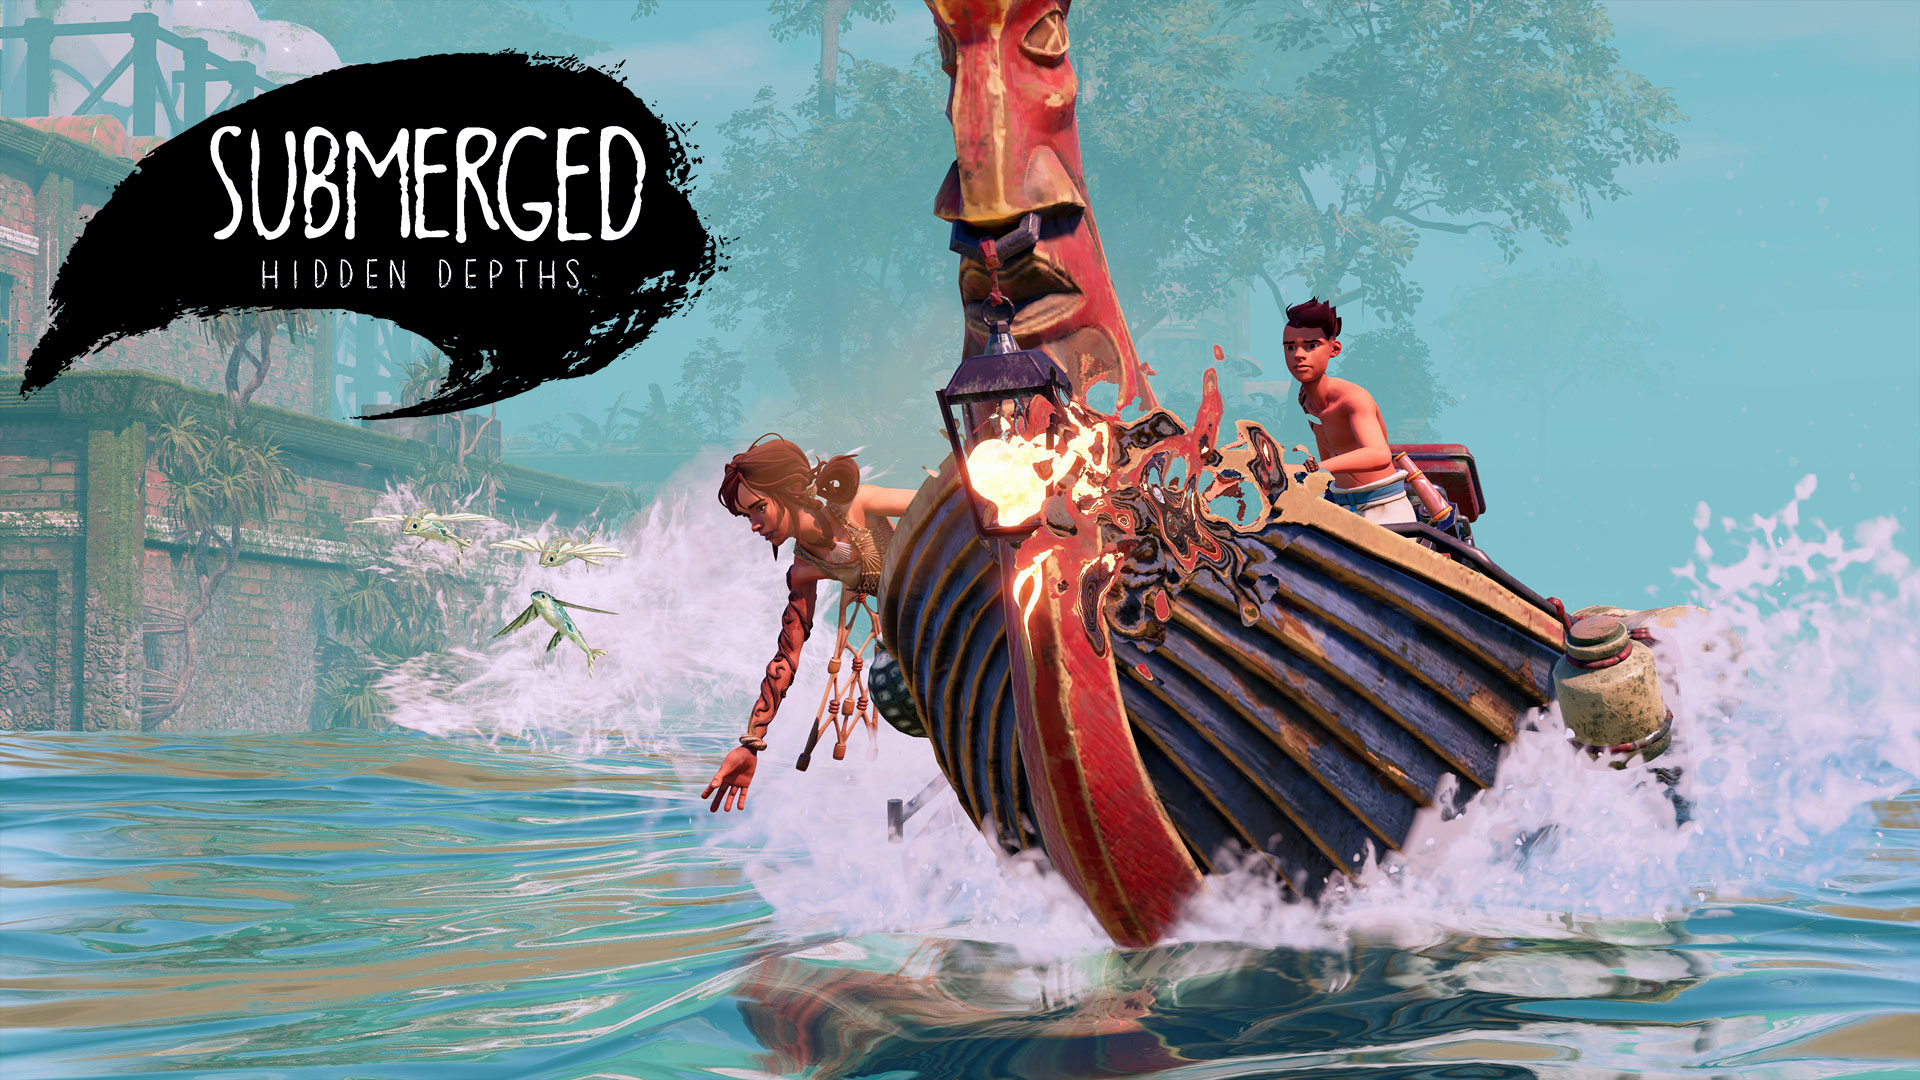 Don't you deserve a break? Immerse yourself in Submerged: Hidden Depths